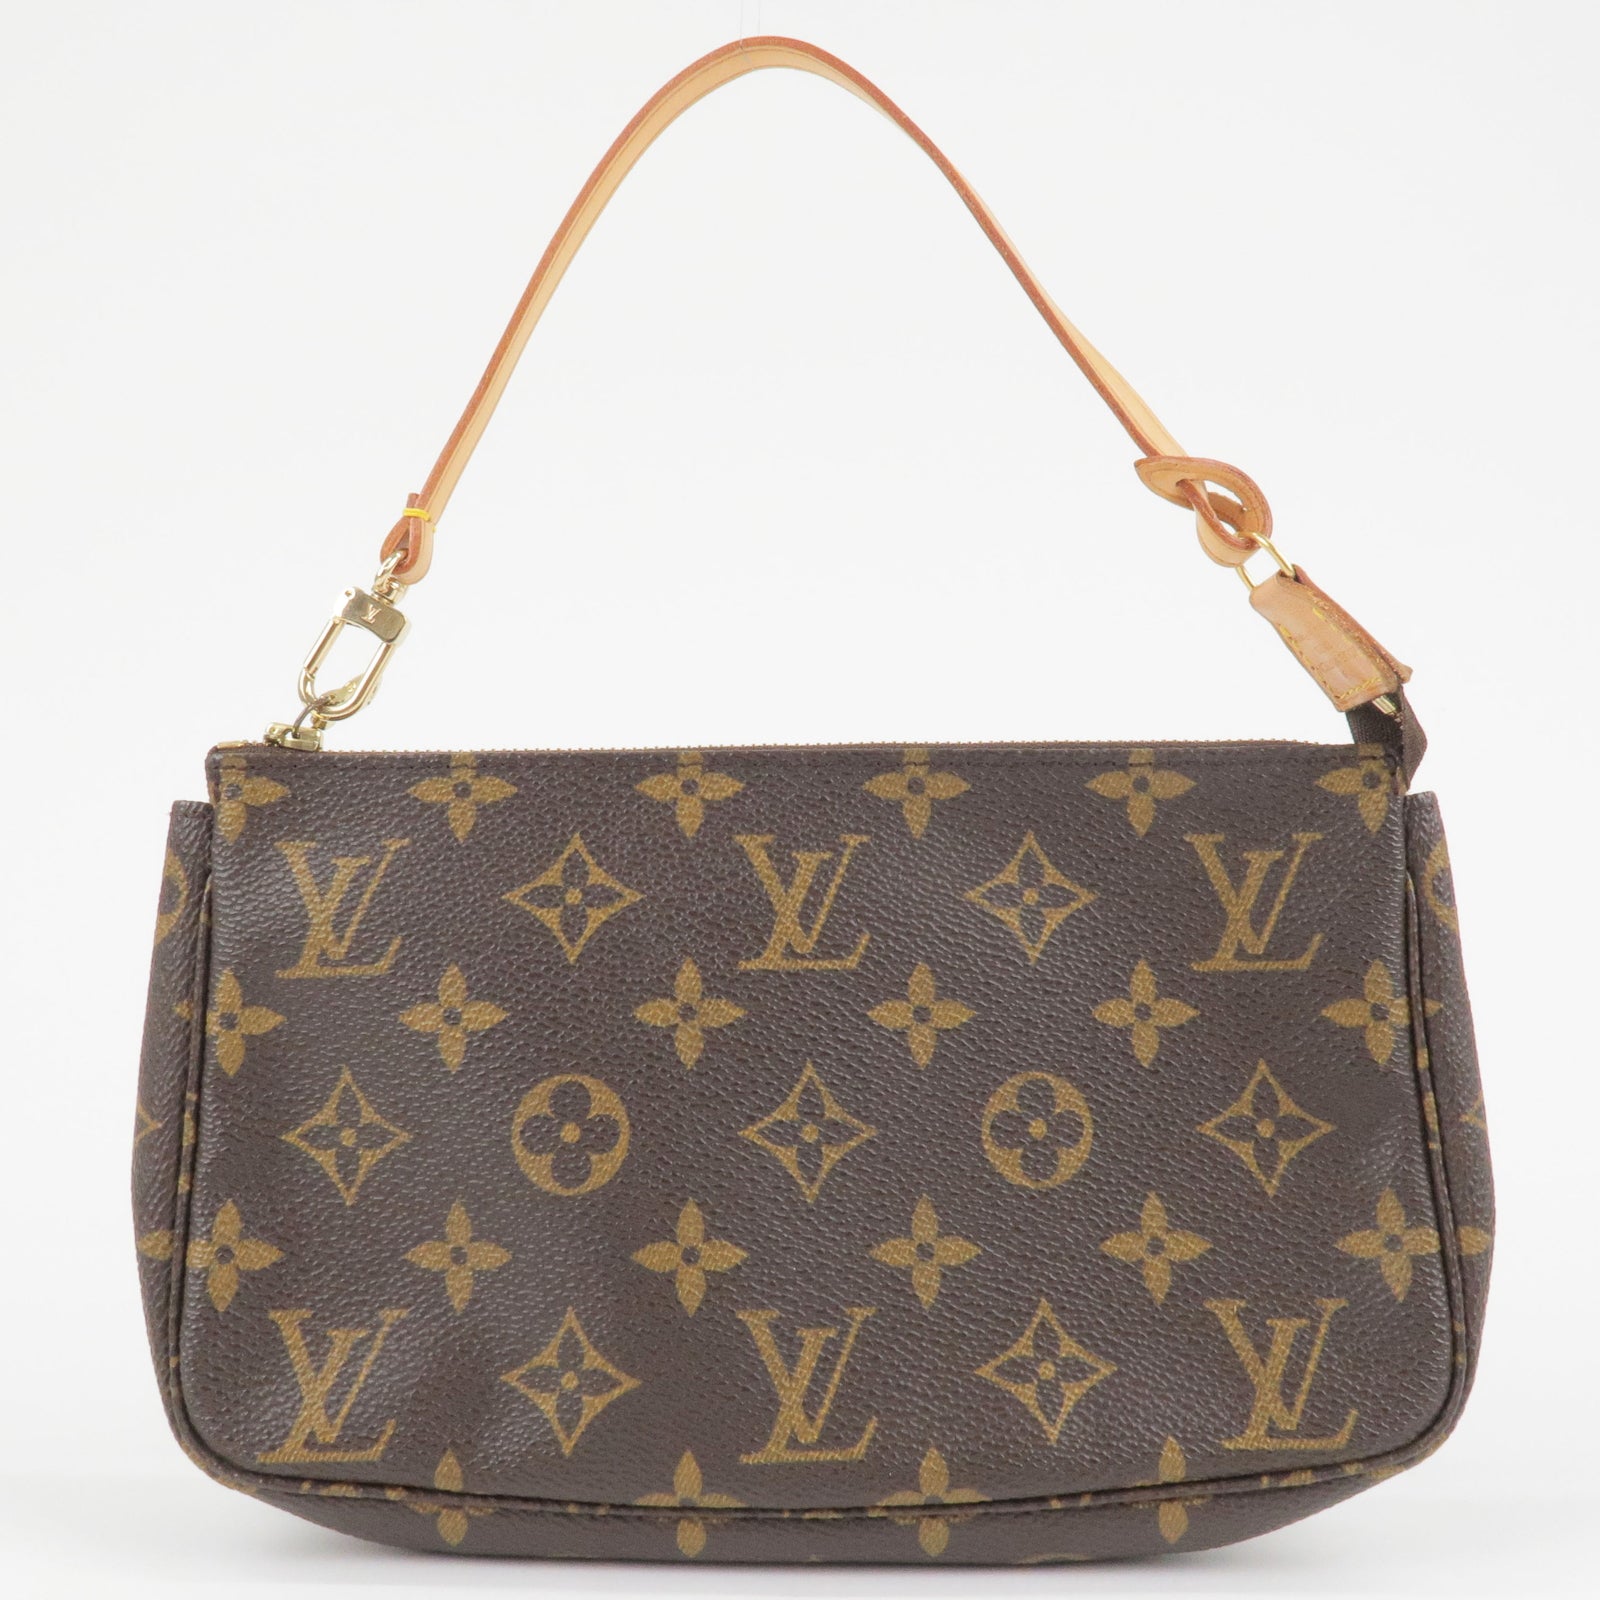 Louis Vuitton on Sale, Up to 0% off